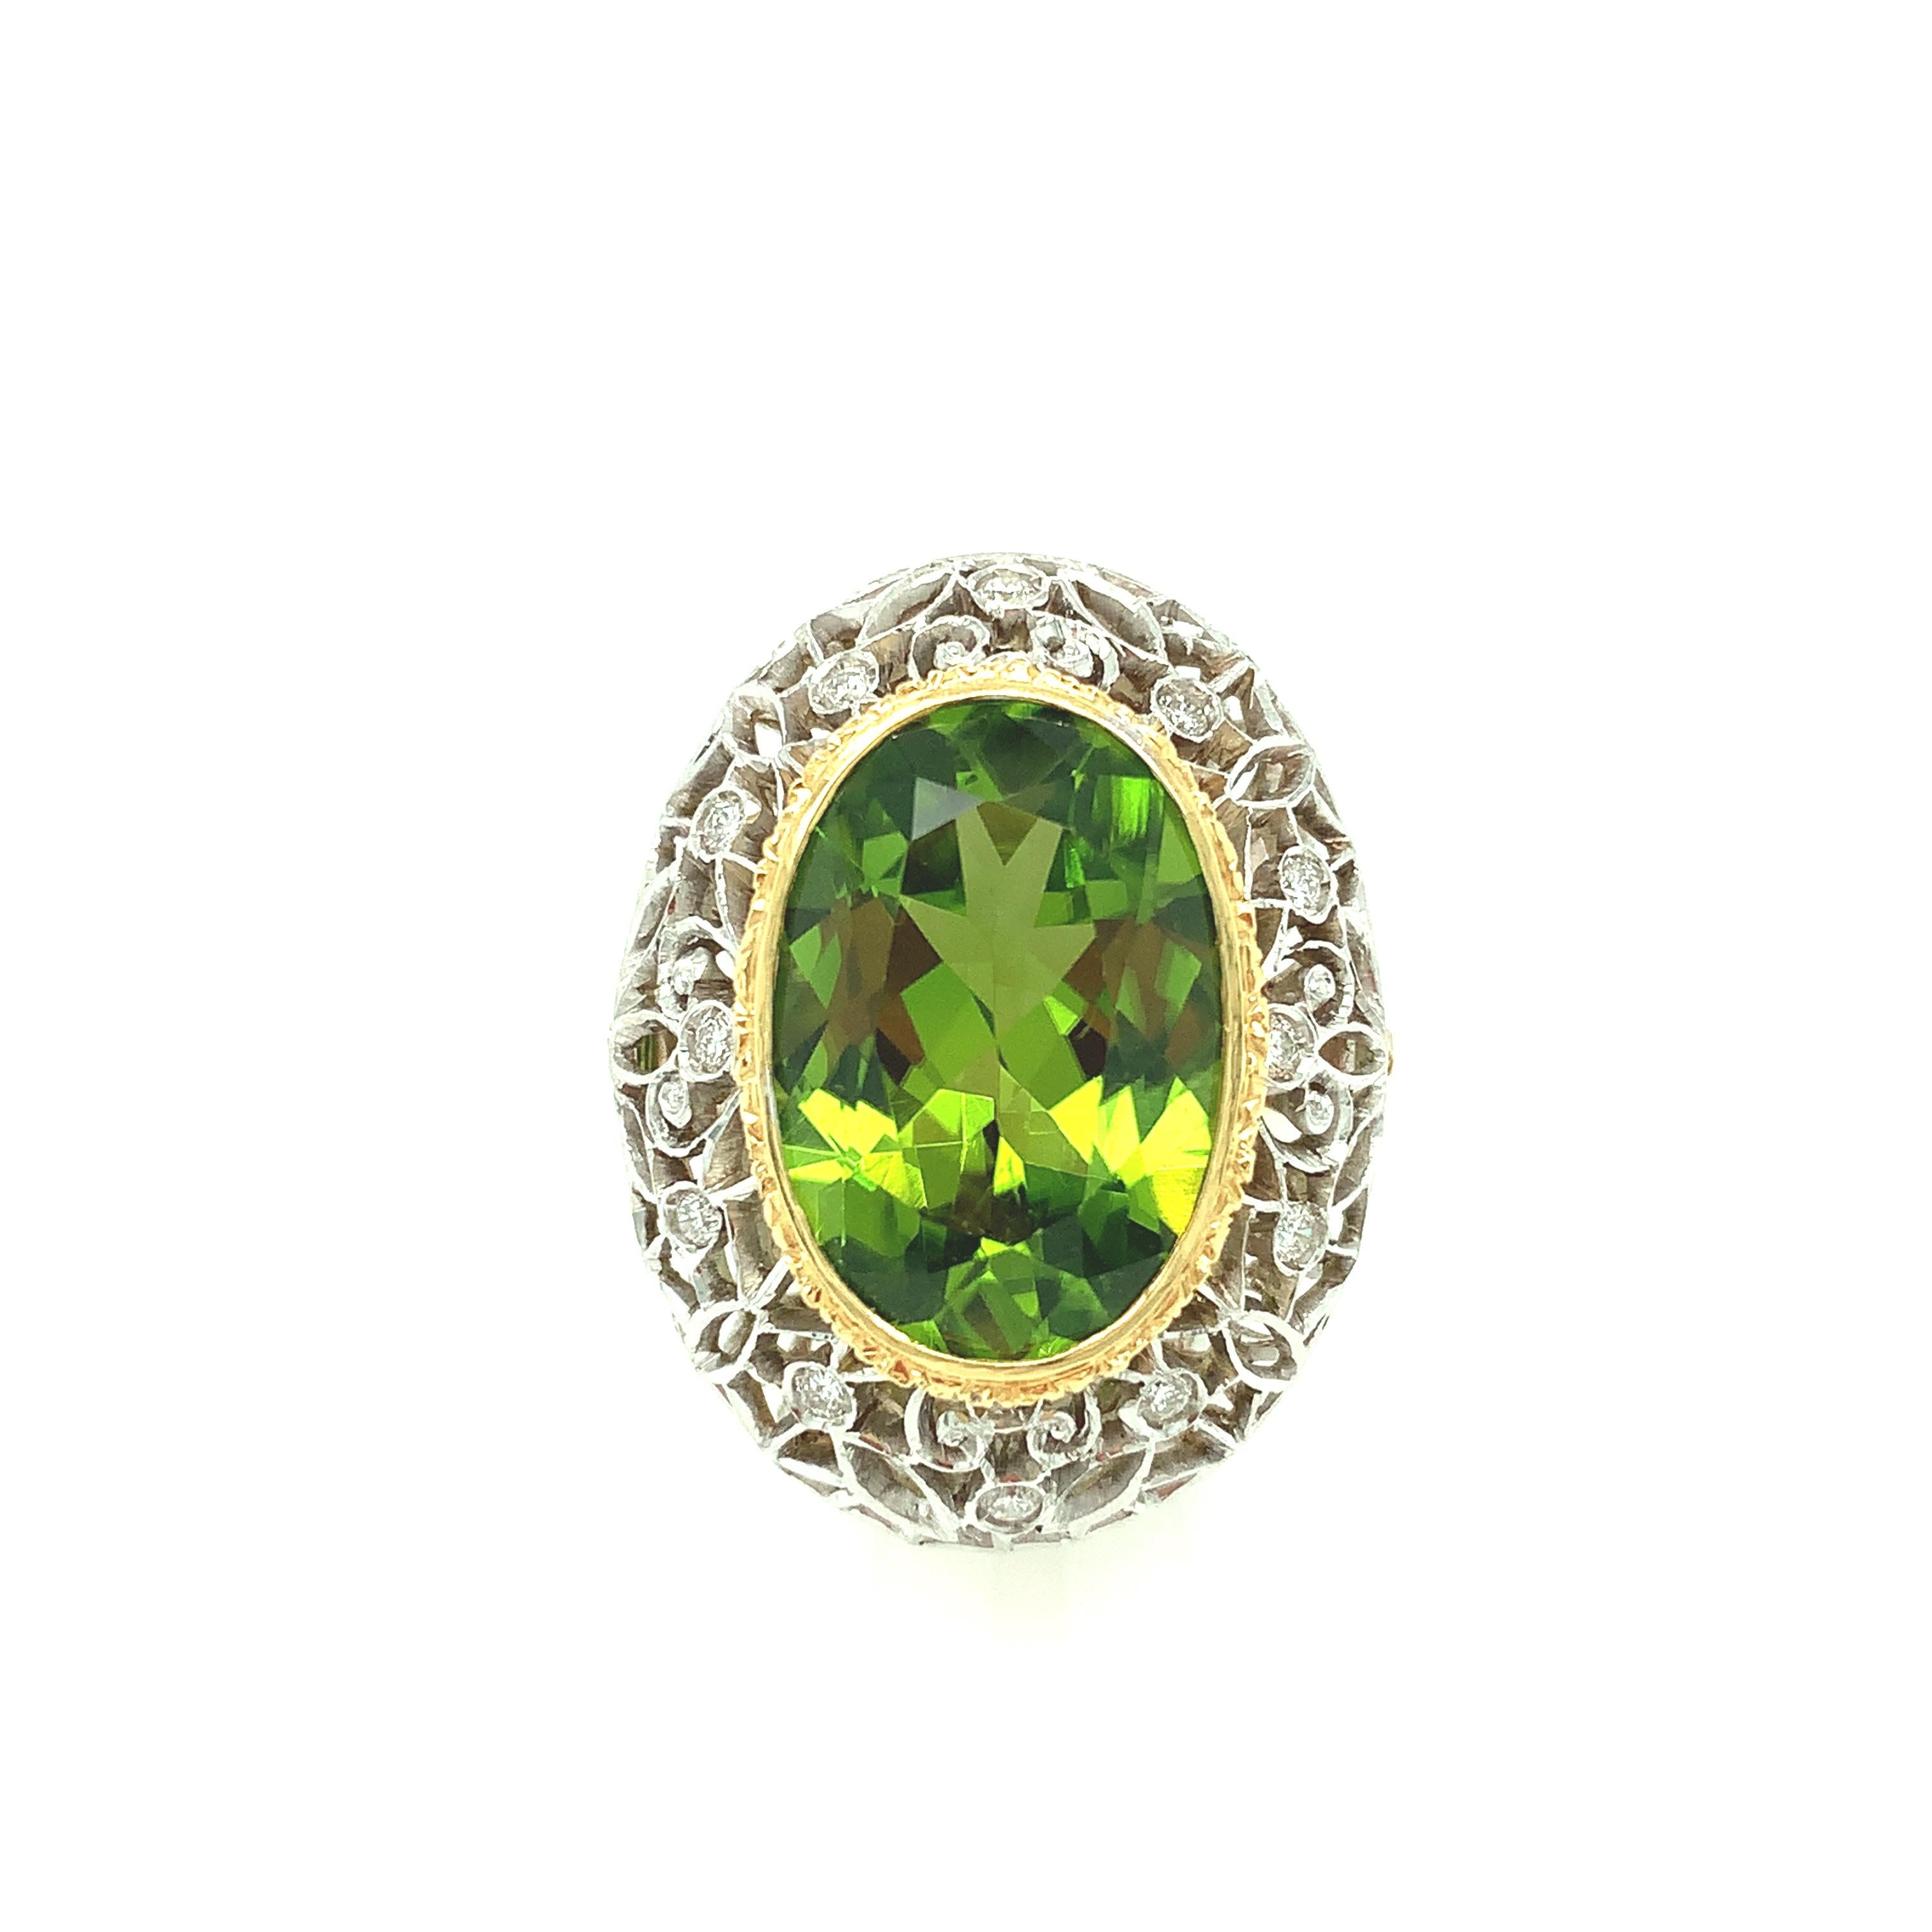 This is a truly beautiful ring, from the size and quality of peridot it features to the exquisite Florentine inspired craftsmanship. The large oval peridot is clear and crystalline, with bright, 